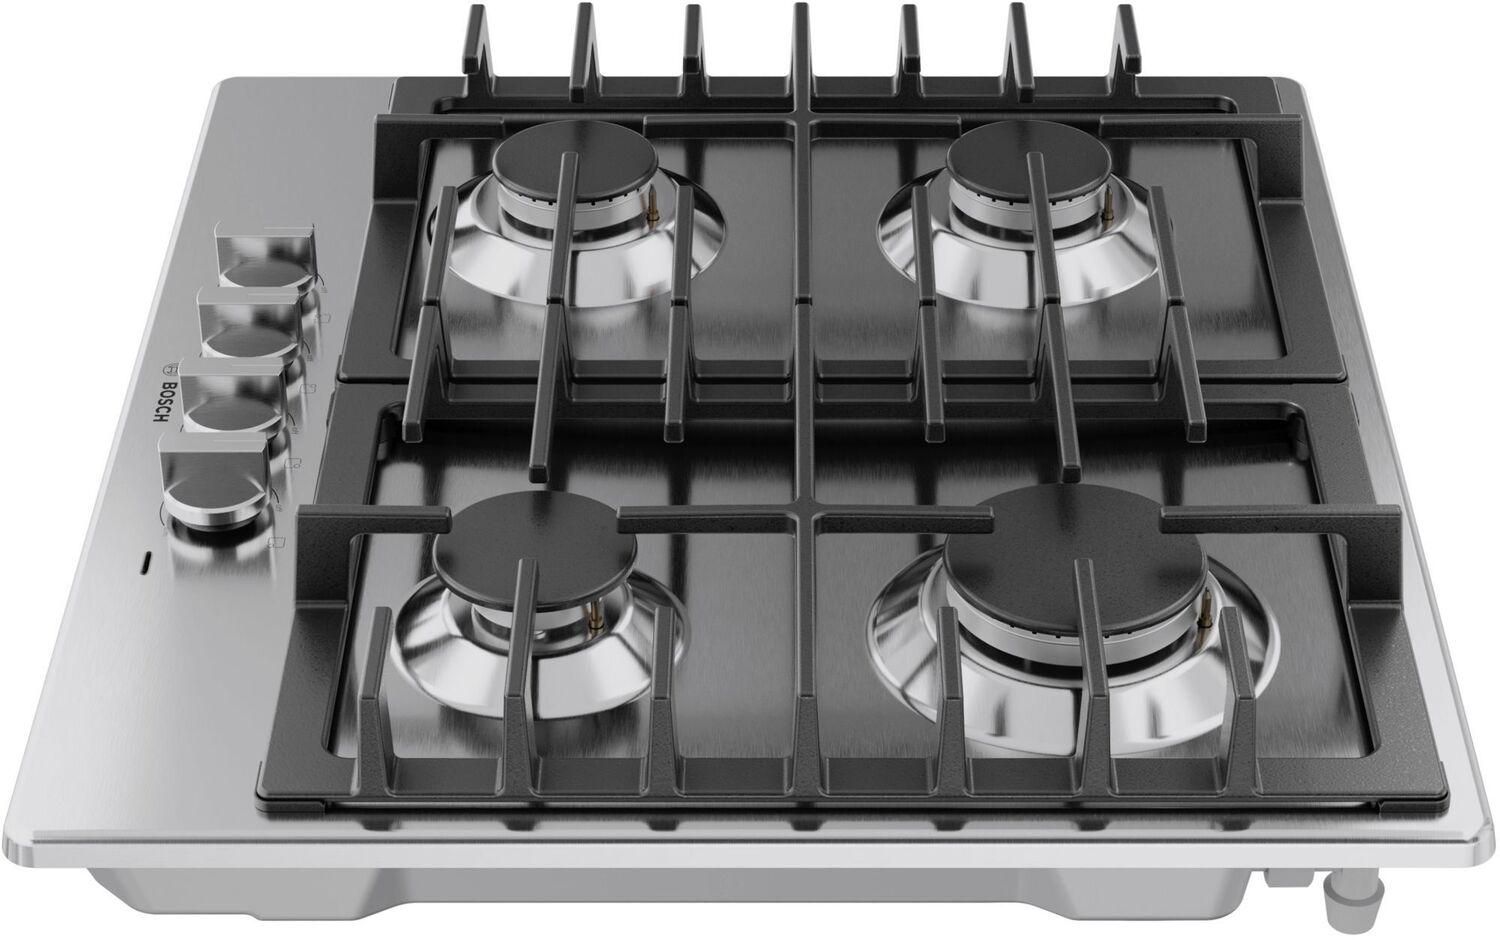 Bosch 500 Series Gas Cooktop Stainless steel NGM5453UC